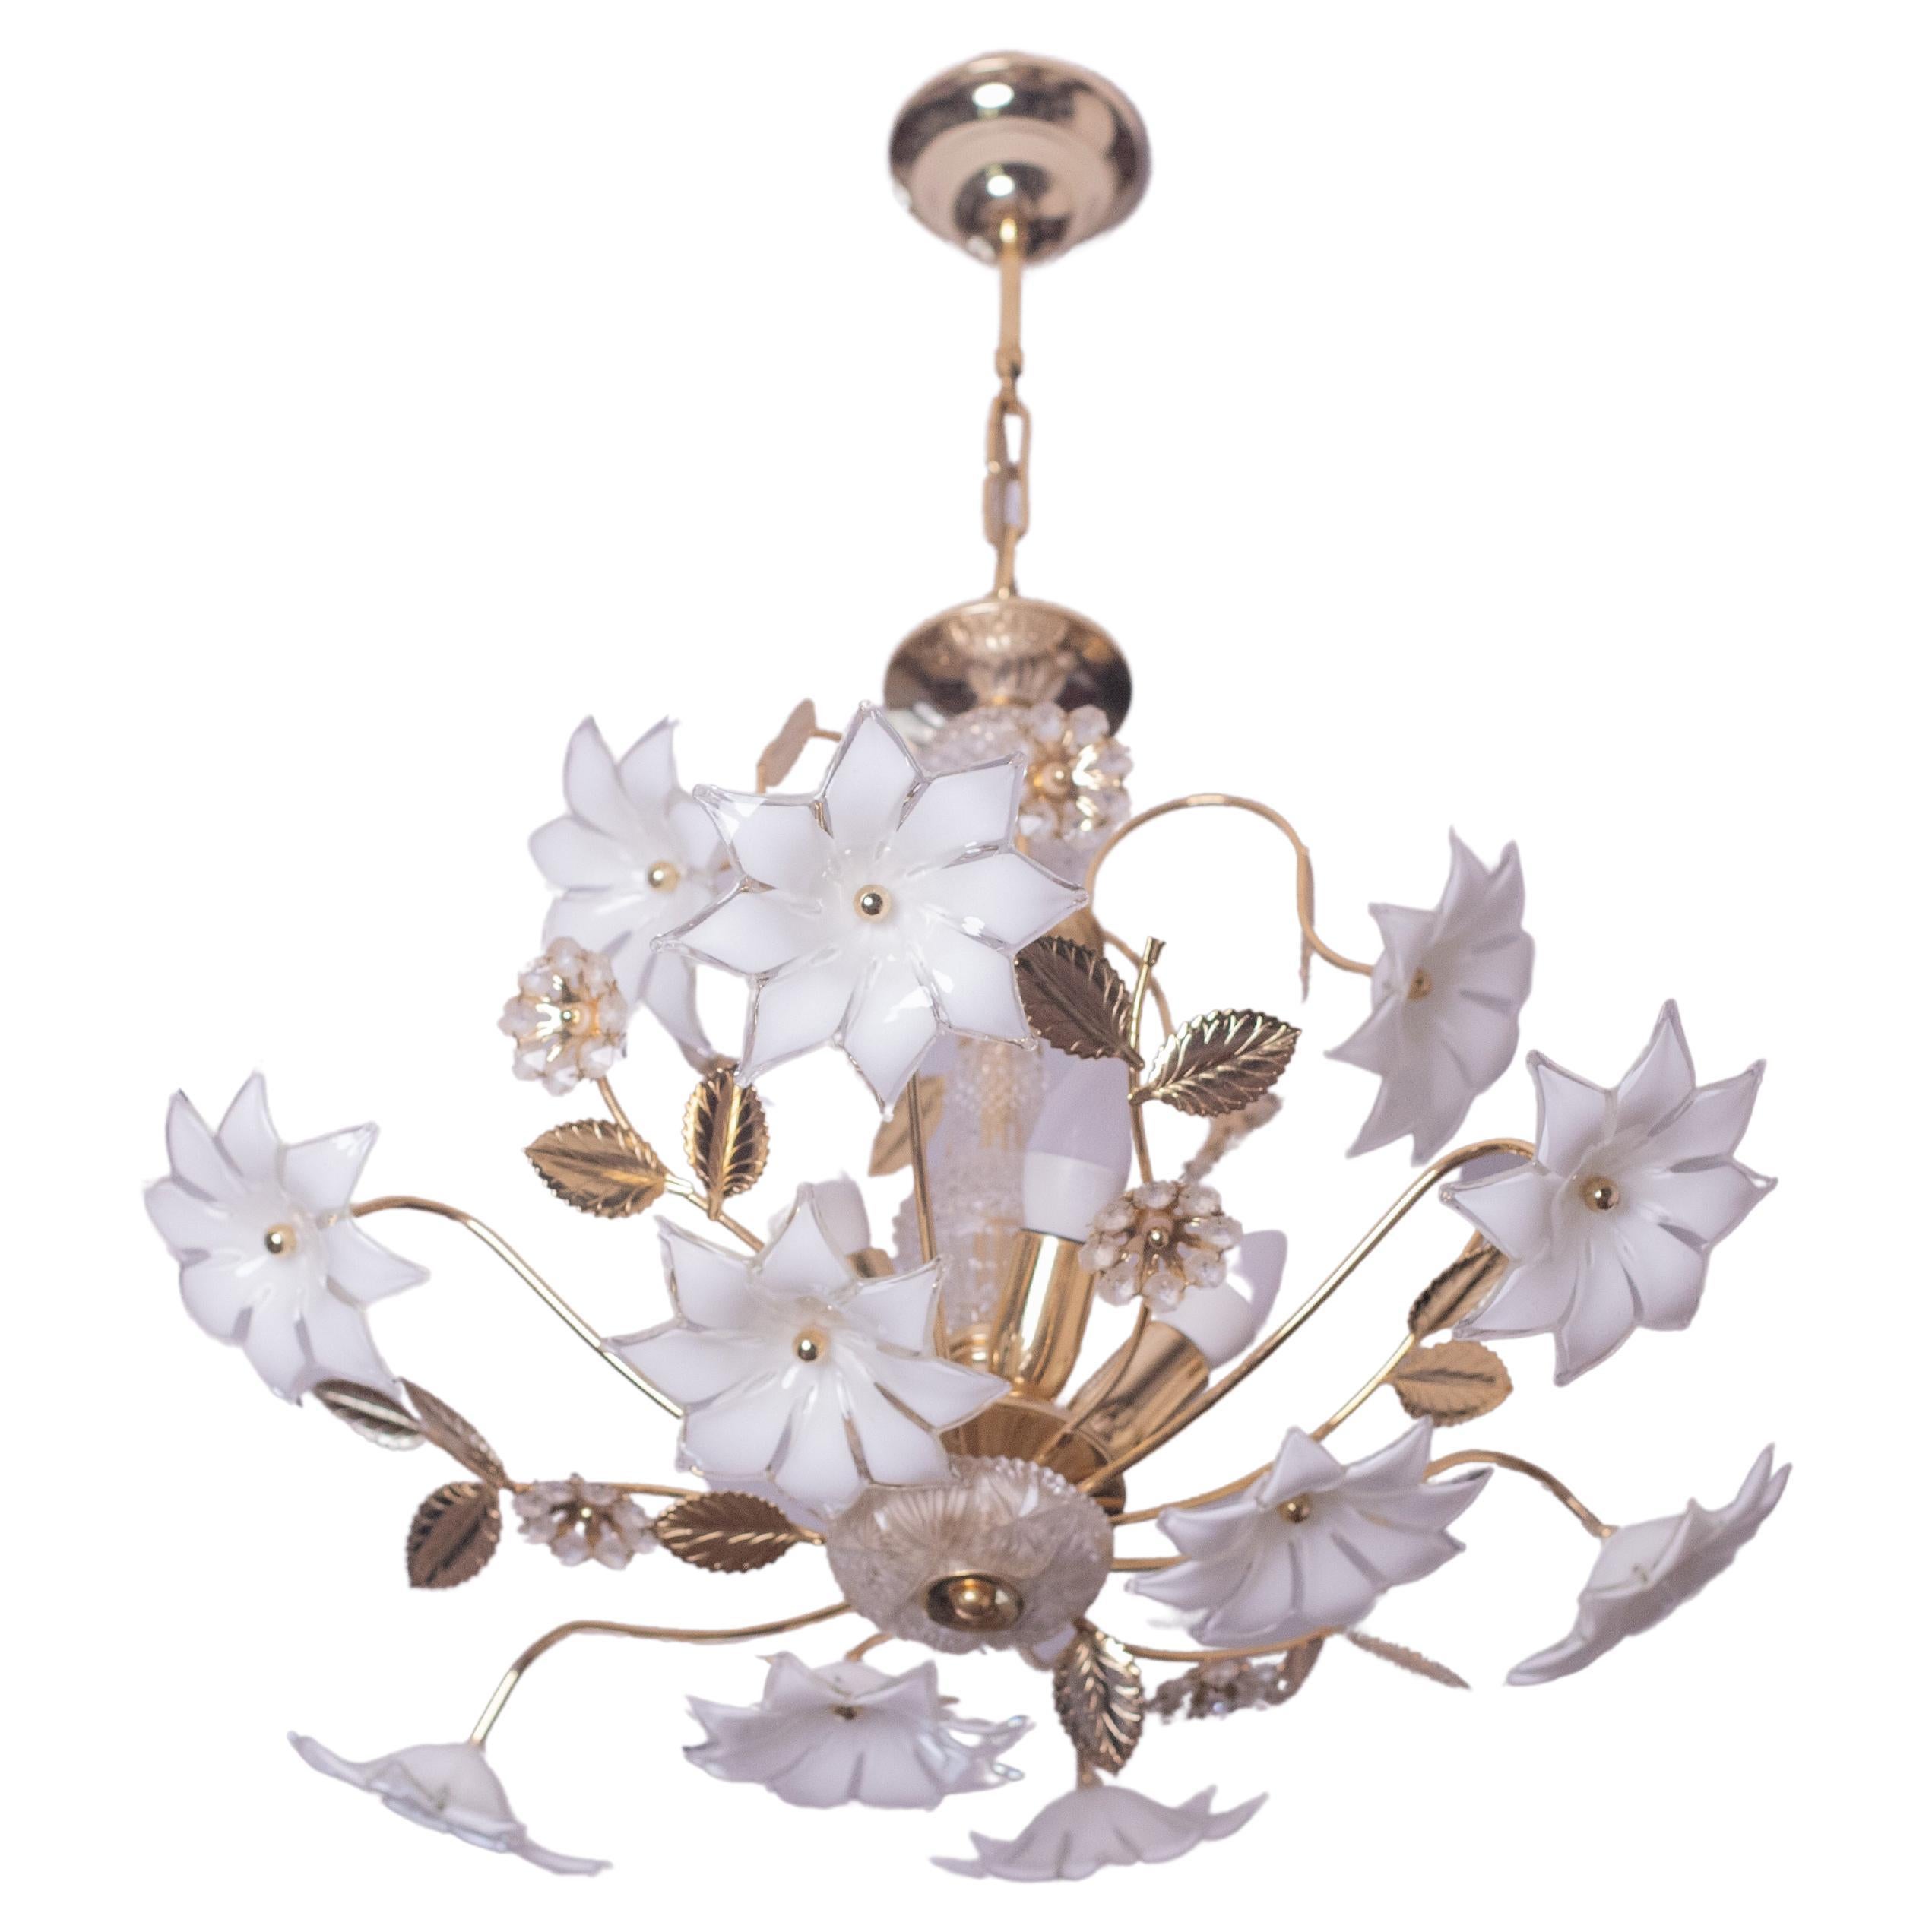 Vintage Murano glass chandelier filled with white glass and crystal flowers, with the central structure covered in crystal.
The chandelier has 5 light points with E14 socket.
The structure is in gold bath, in excellent vintage condition.
The